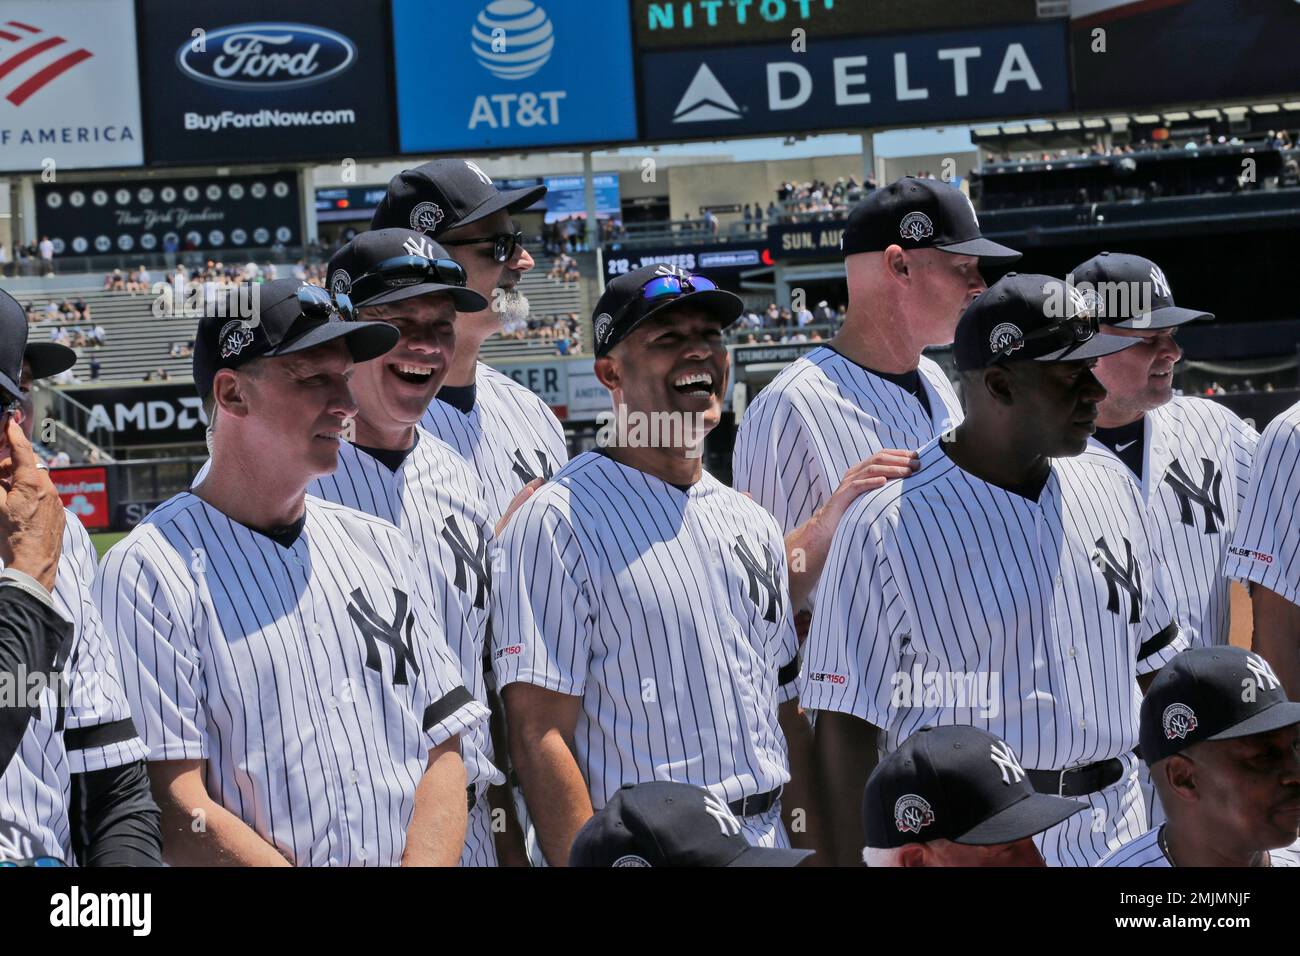 Former New York Yankees players, including Mariano Rivera, center